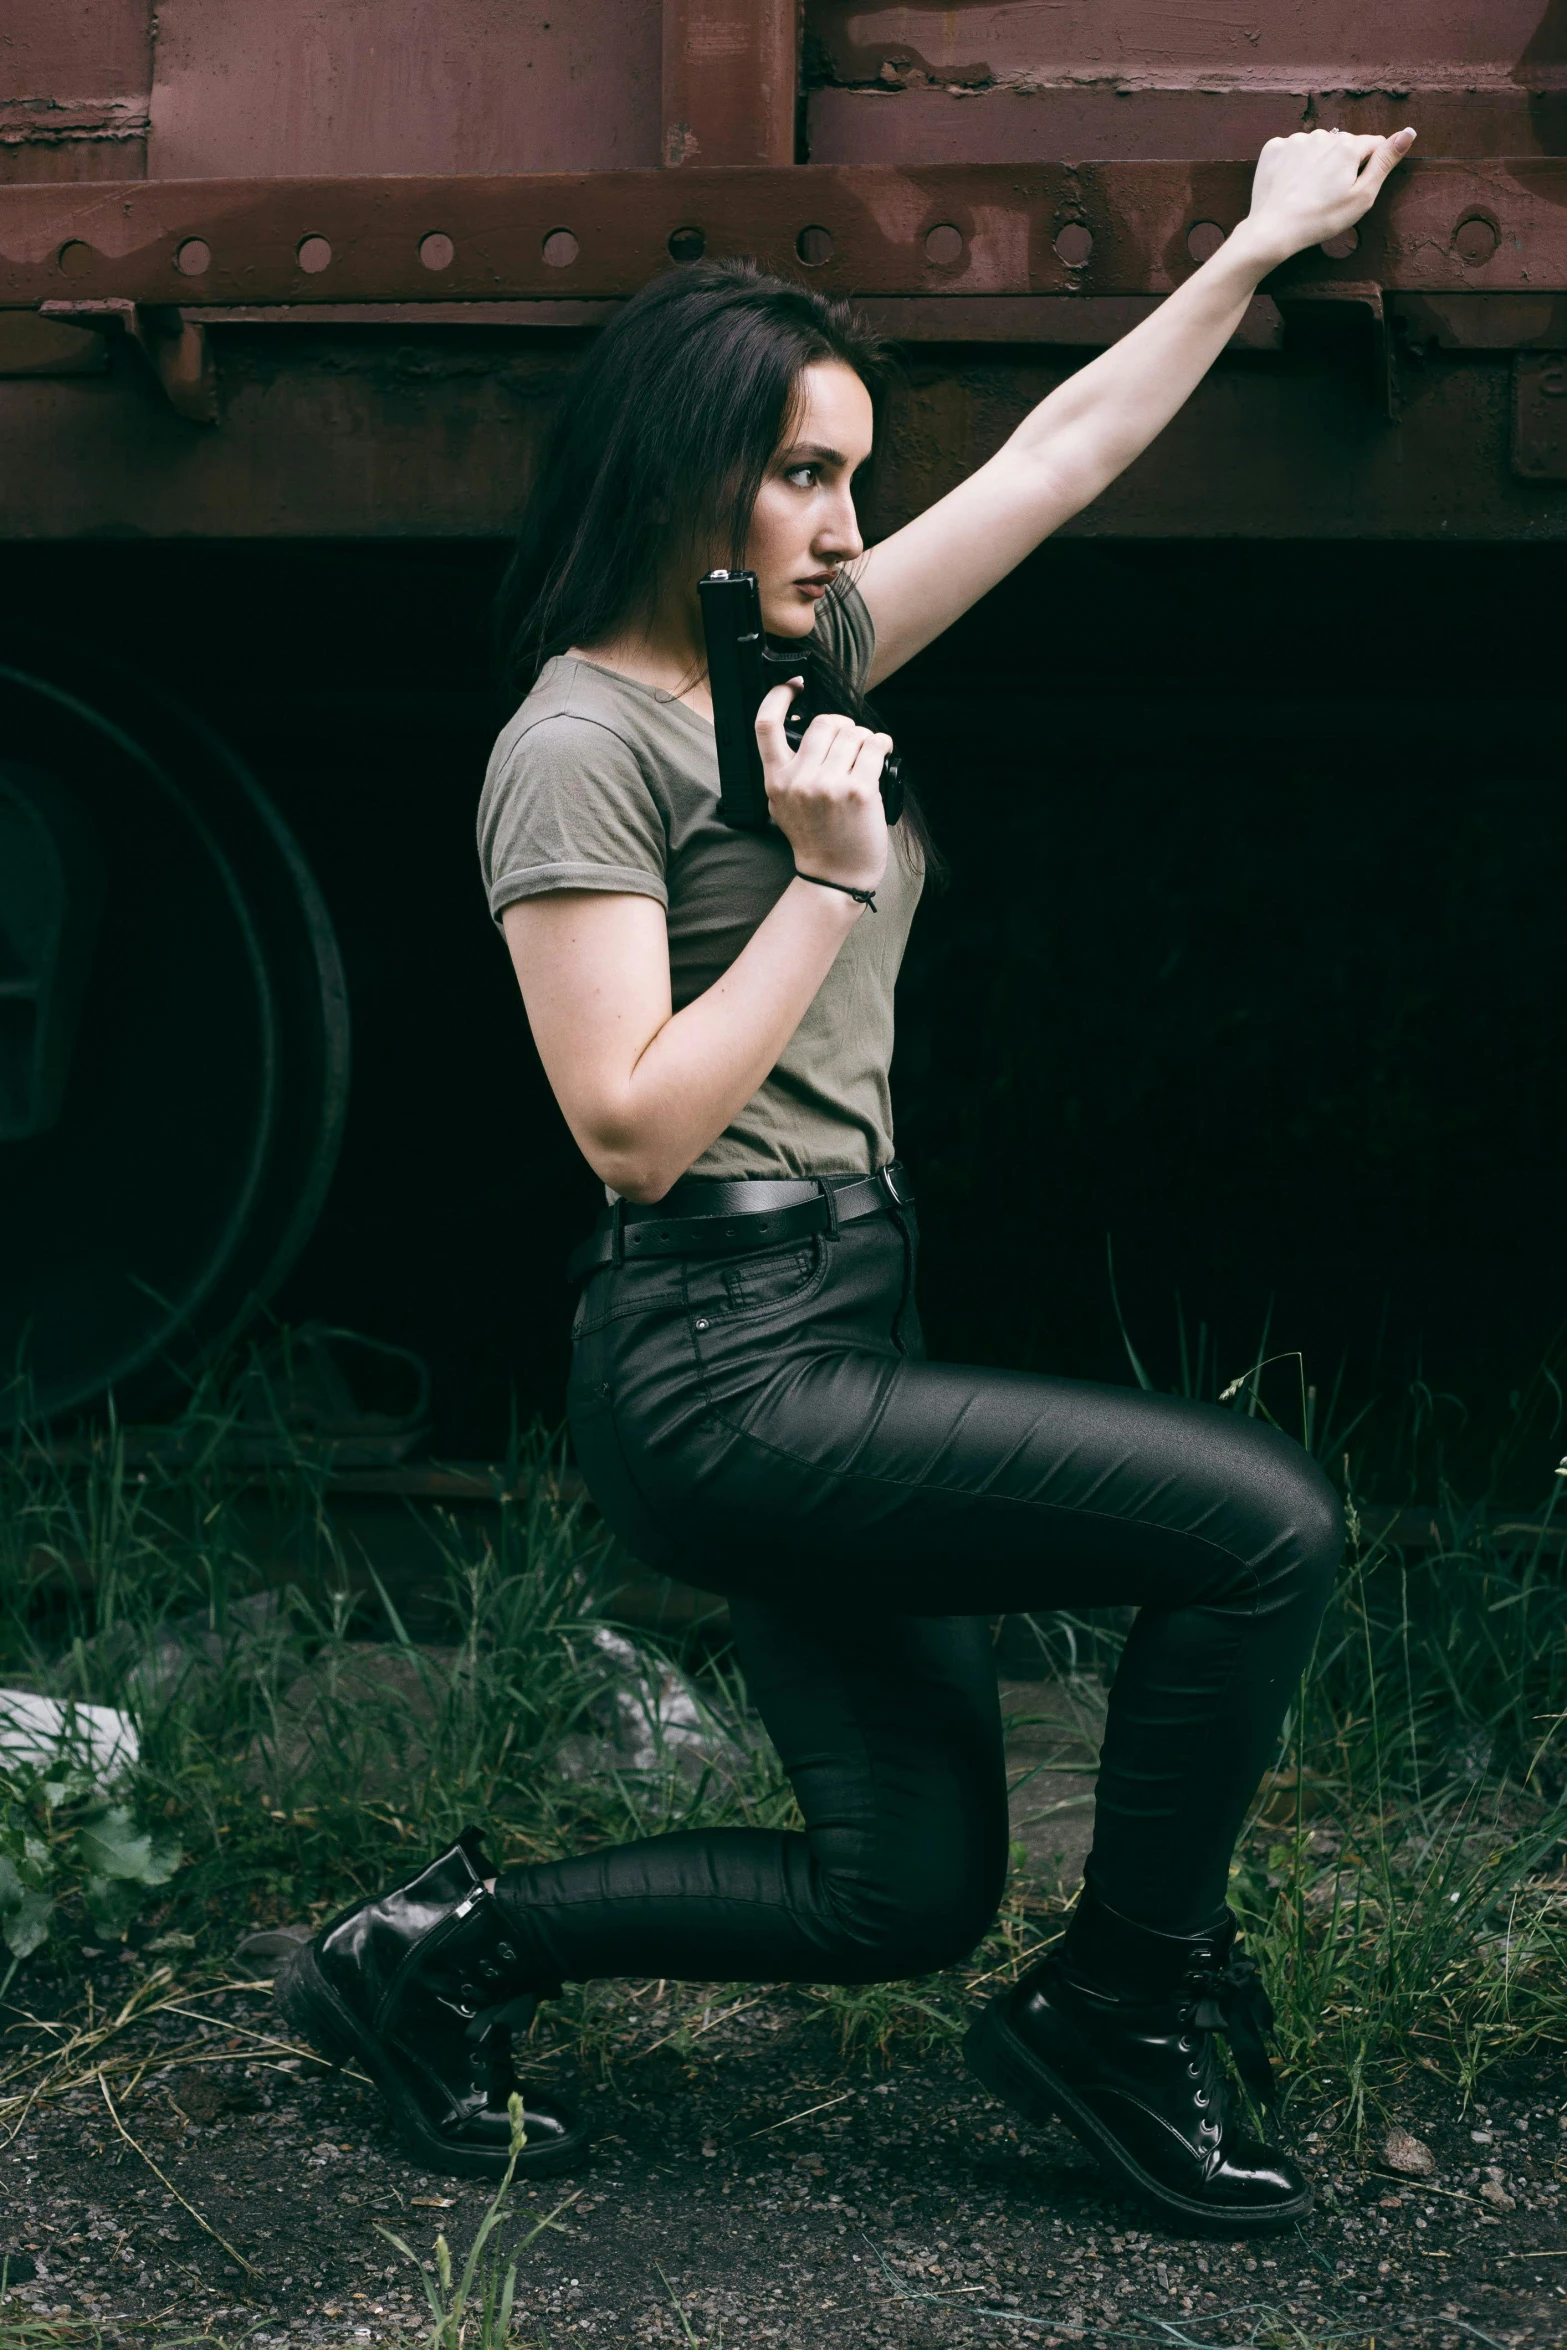 a woman posing for a picture in front of a train, an album cover, pexels contest winner, leather pants, combat pose, amouranth, wearing pants and a t-shirt